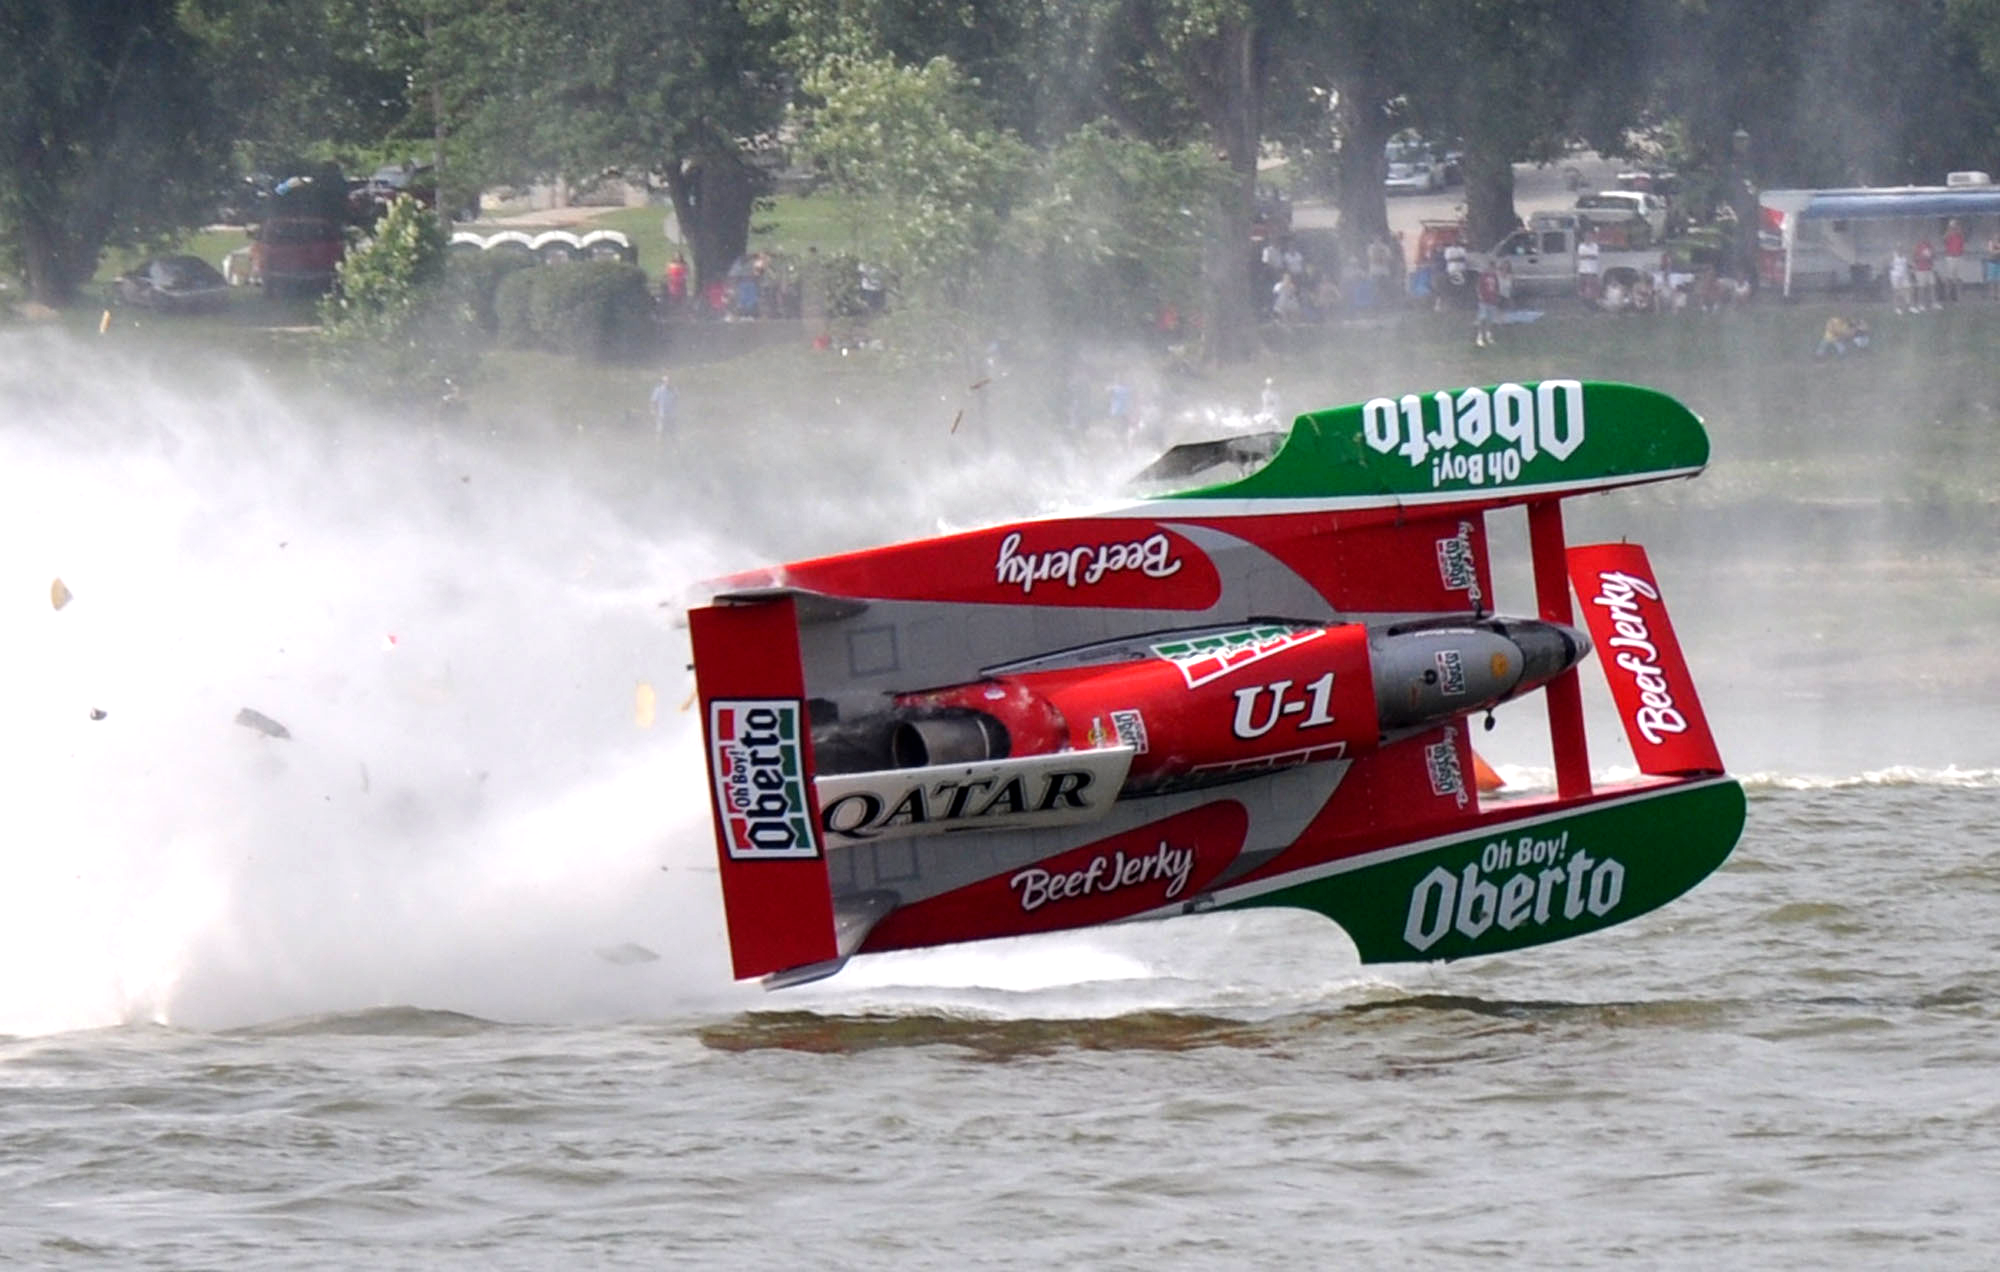 unlimited hydroplane, Race, Racing, Jet, Hydroplane, Boat, Ship, Hot, Rod, Rods, Rm Wallpaper